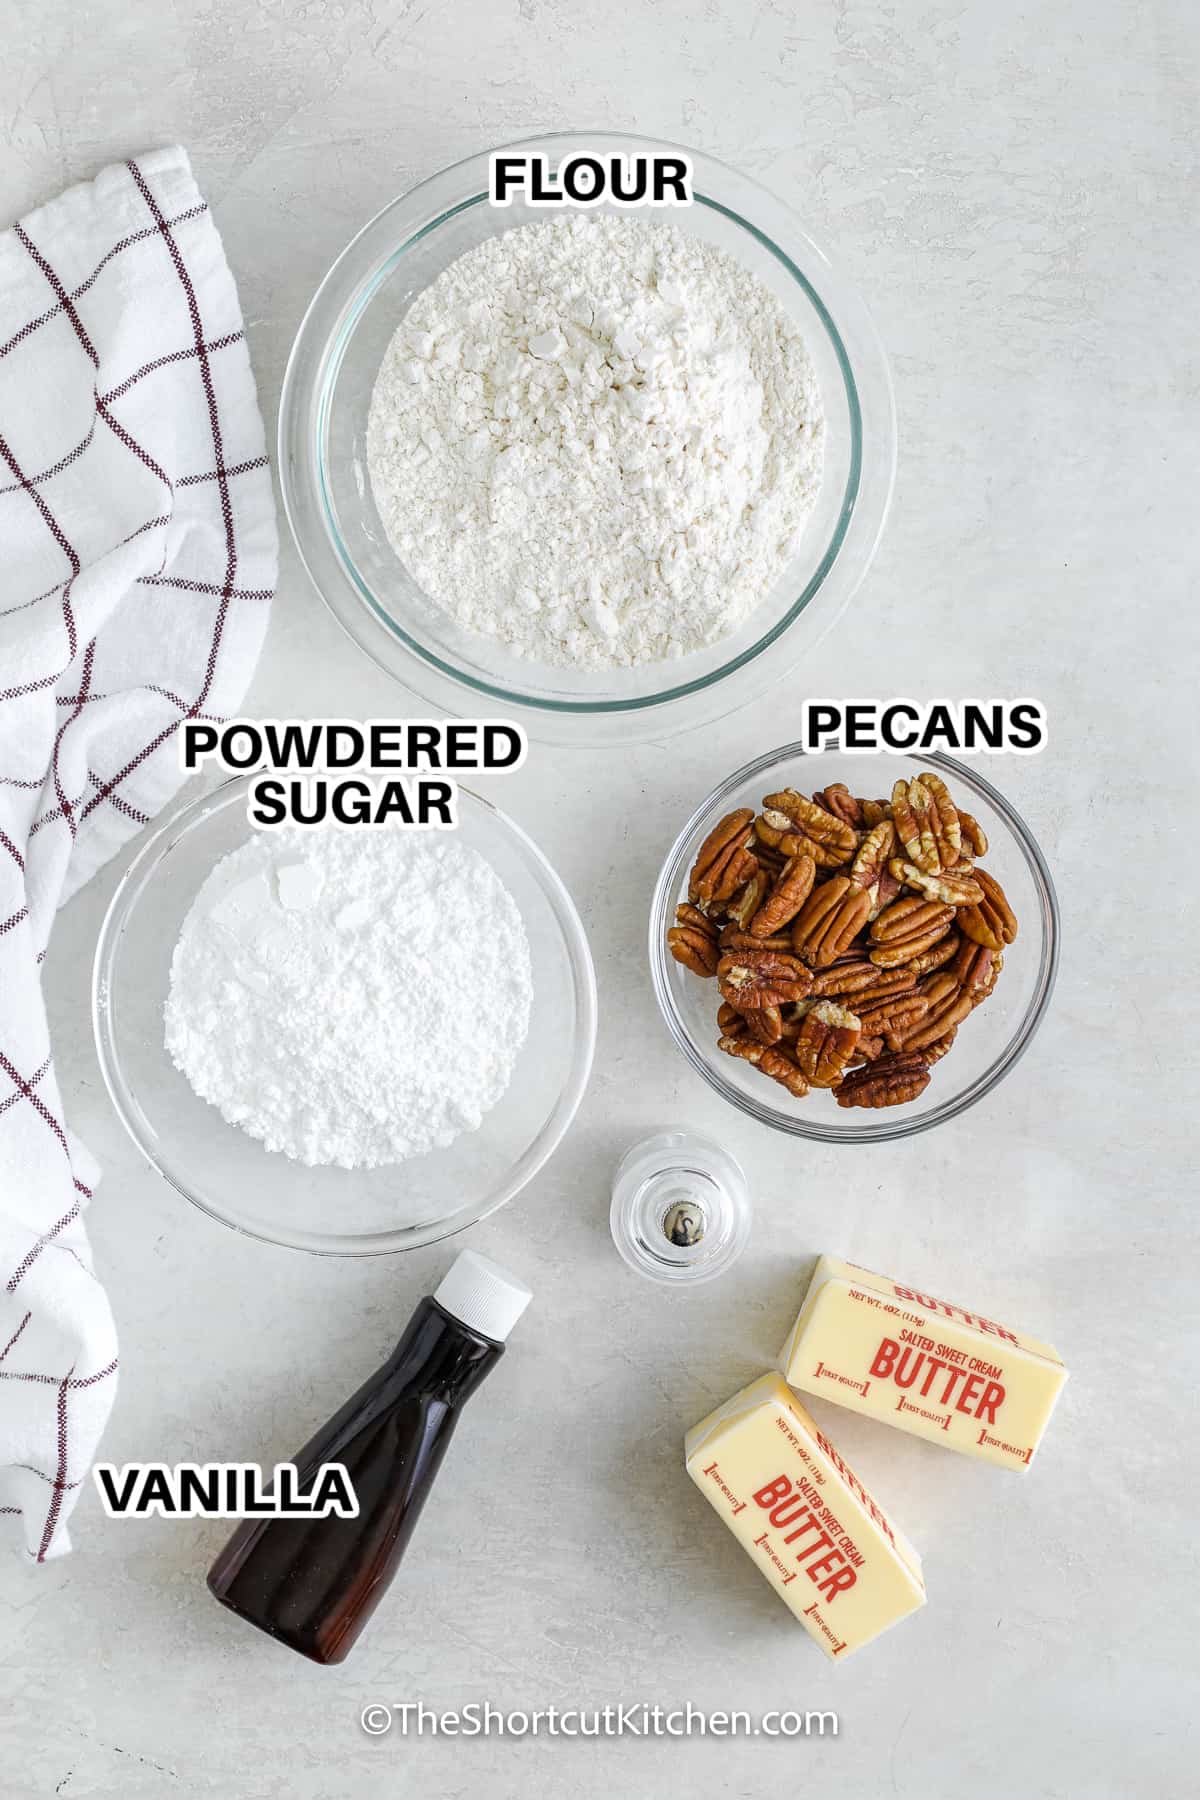 ingredients to make snowball cookies including flour, powdered sugar, pecans, vanilla, butter, and salt